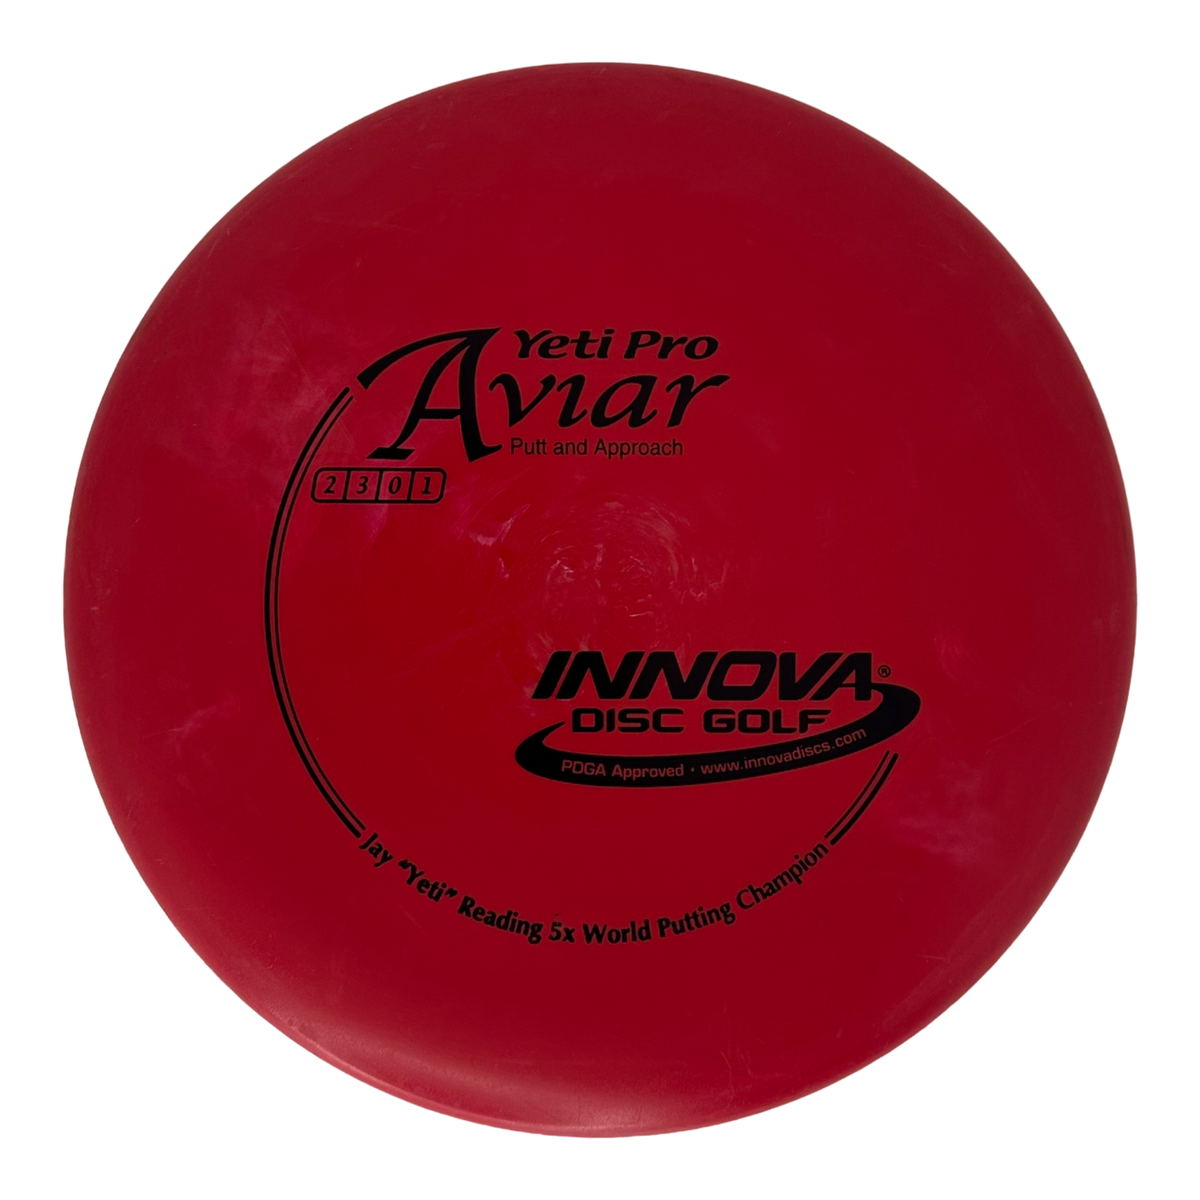 Innova Pre-Owned Putters